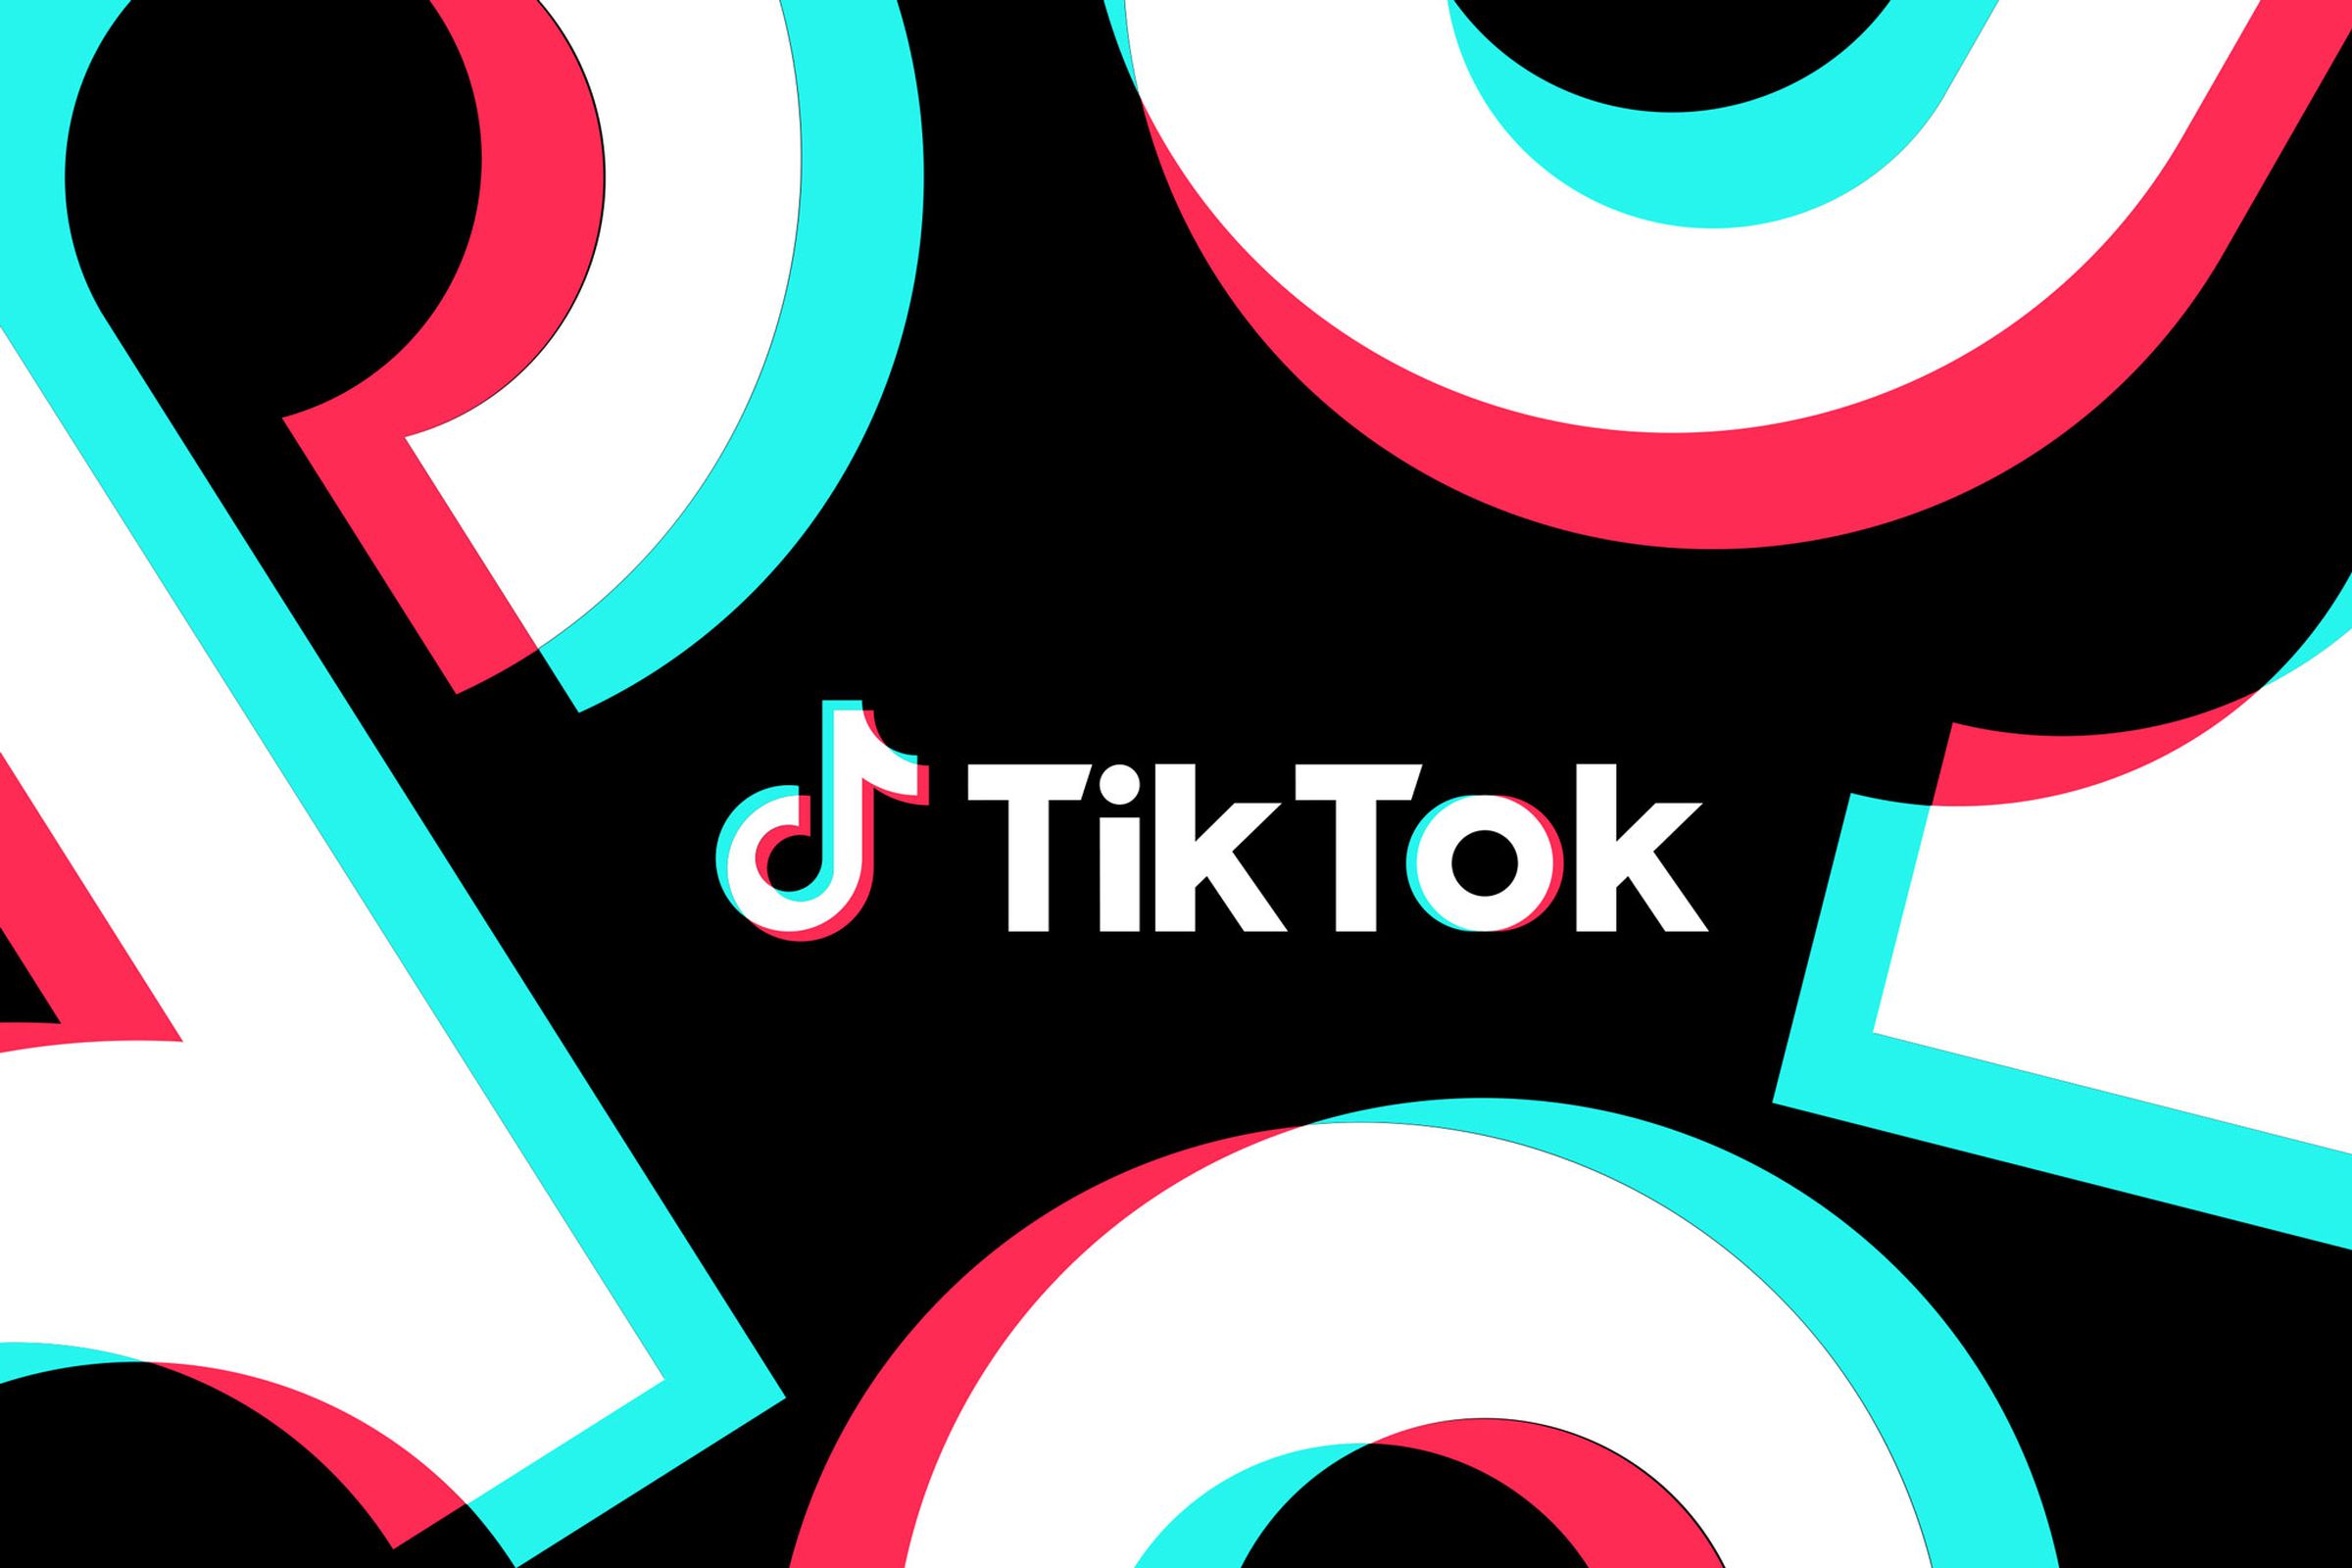 TikTok logo on a black background with large pink, white, and aqua icons repeating